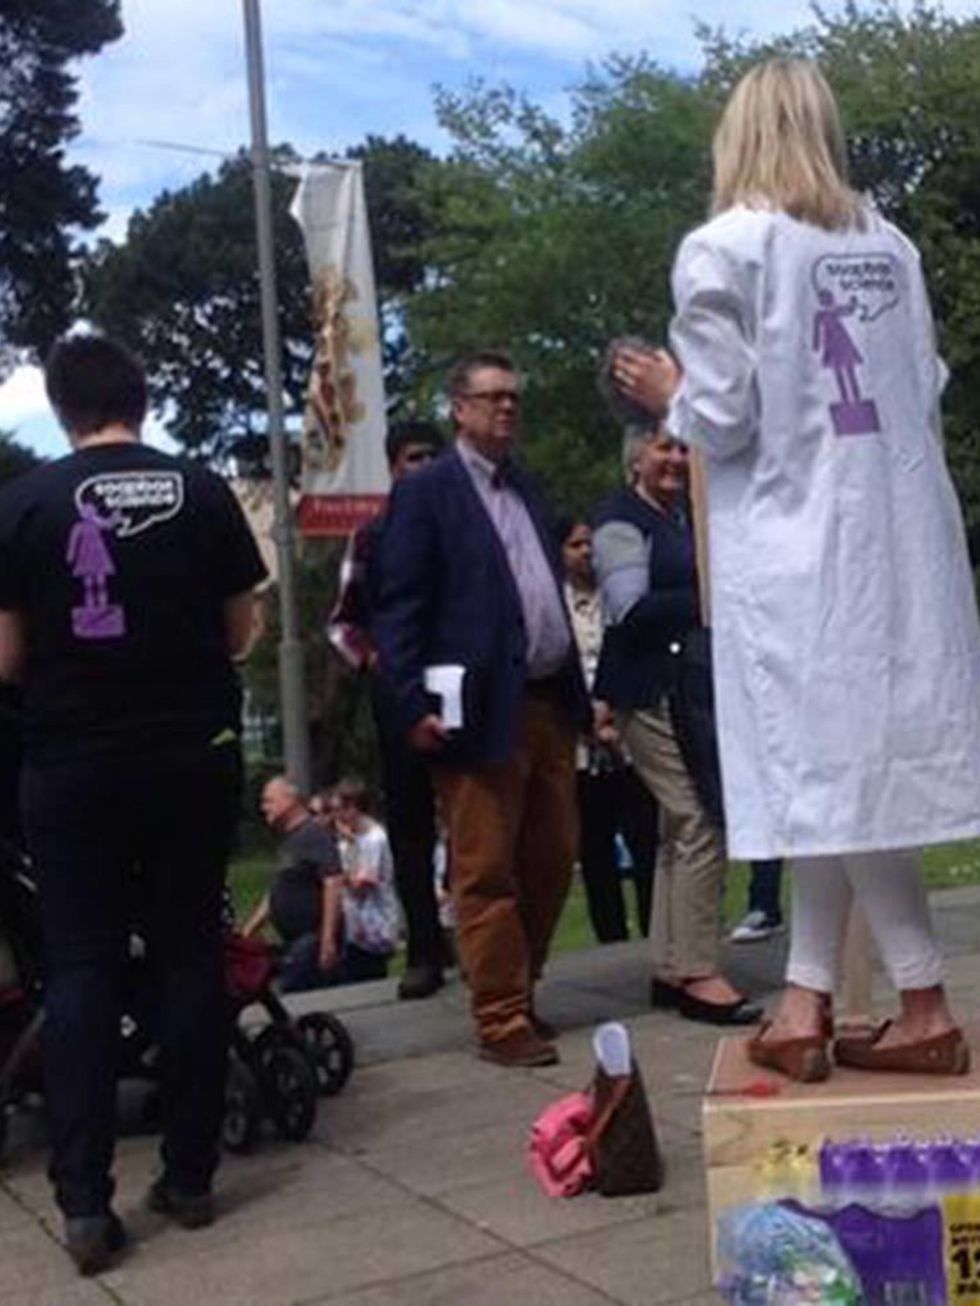 <p>Soapbox Science @SoapboxScience</p>

<p>Top female academics takeover public areas at UK-wide events promoting remarkable women in science. It&rsquo;s a unique public outreach programme.</p>